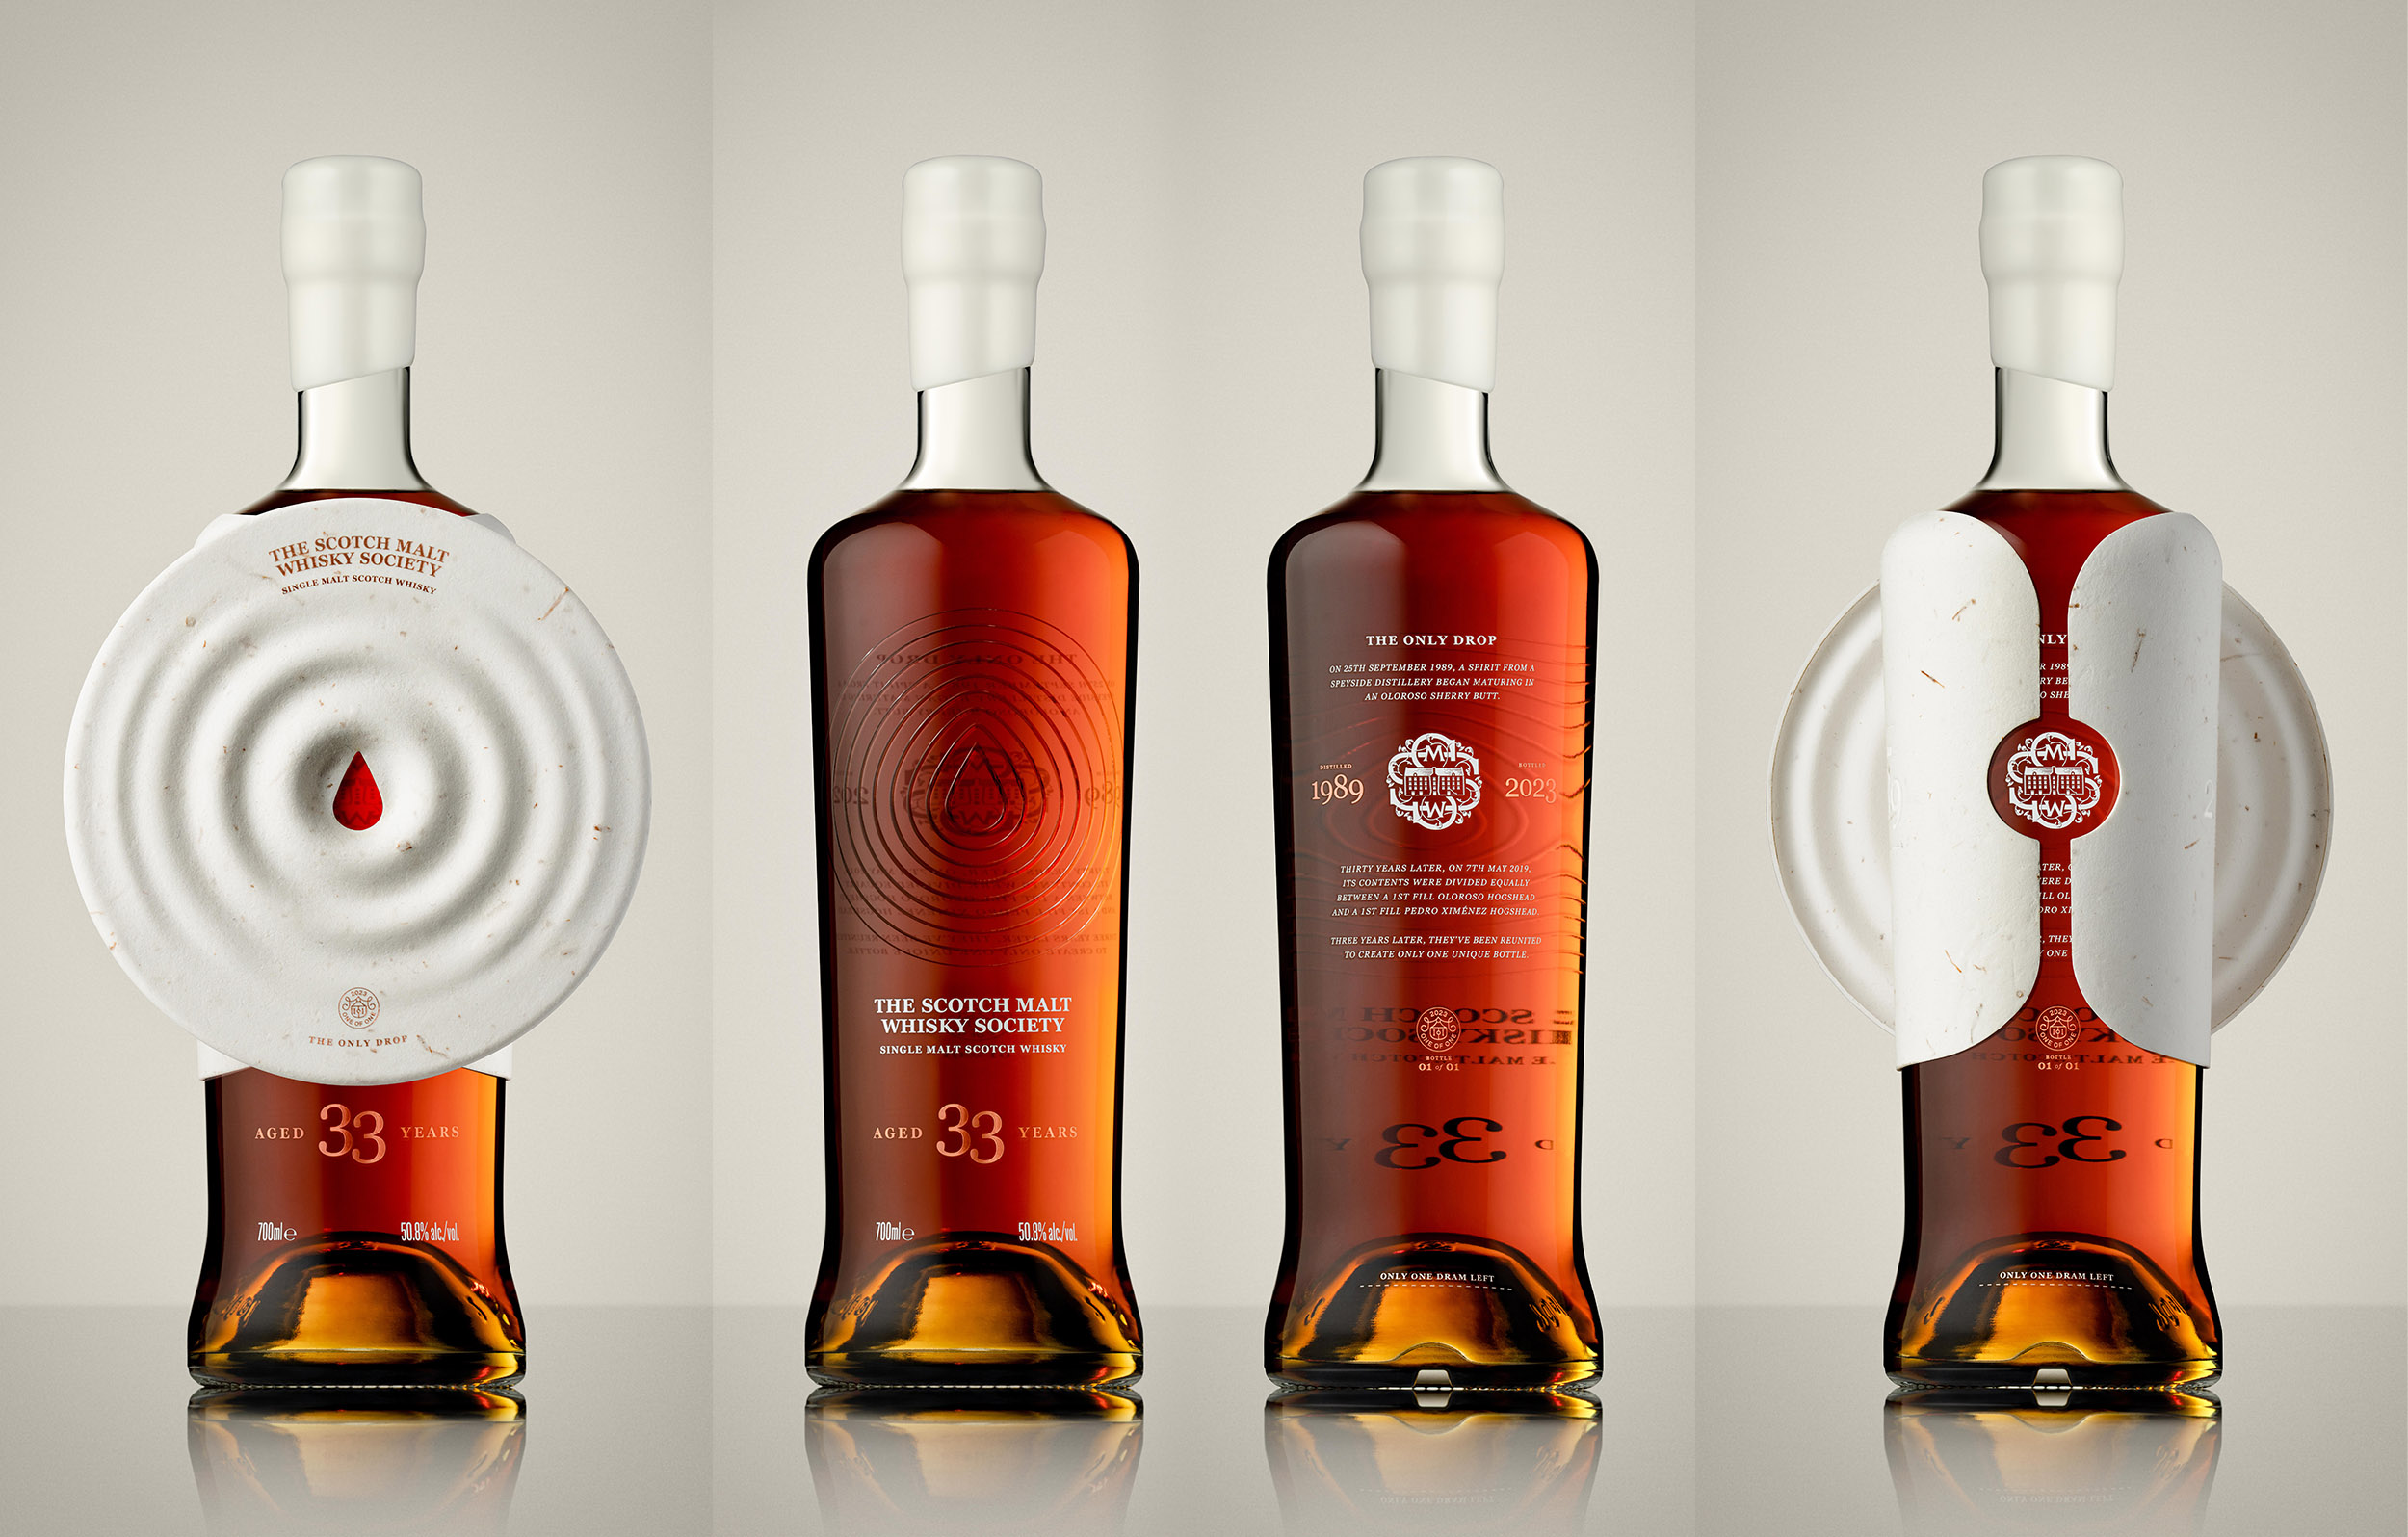 Stckmn Creates Industry First Packaging Design for Never-to-Be-Repeated Whisky Release ‘The Only Drop’